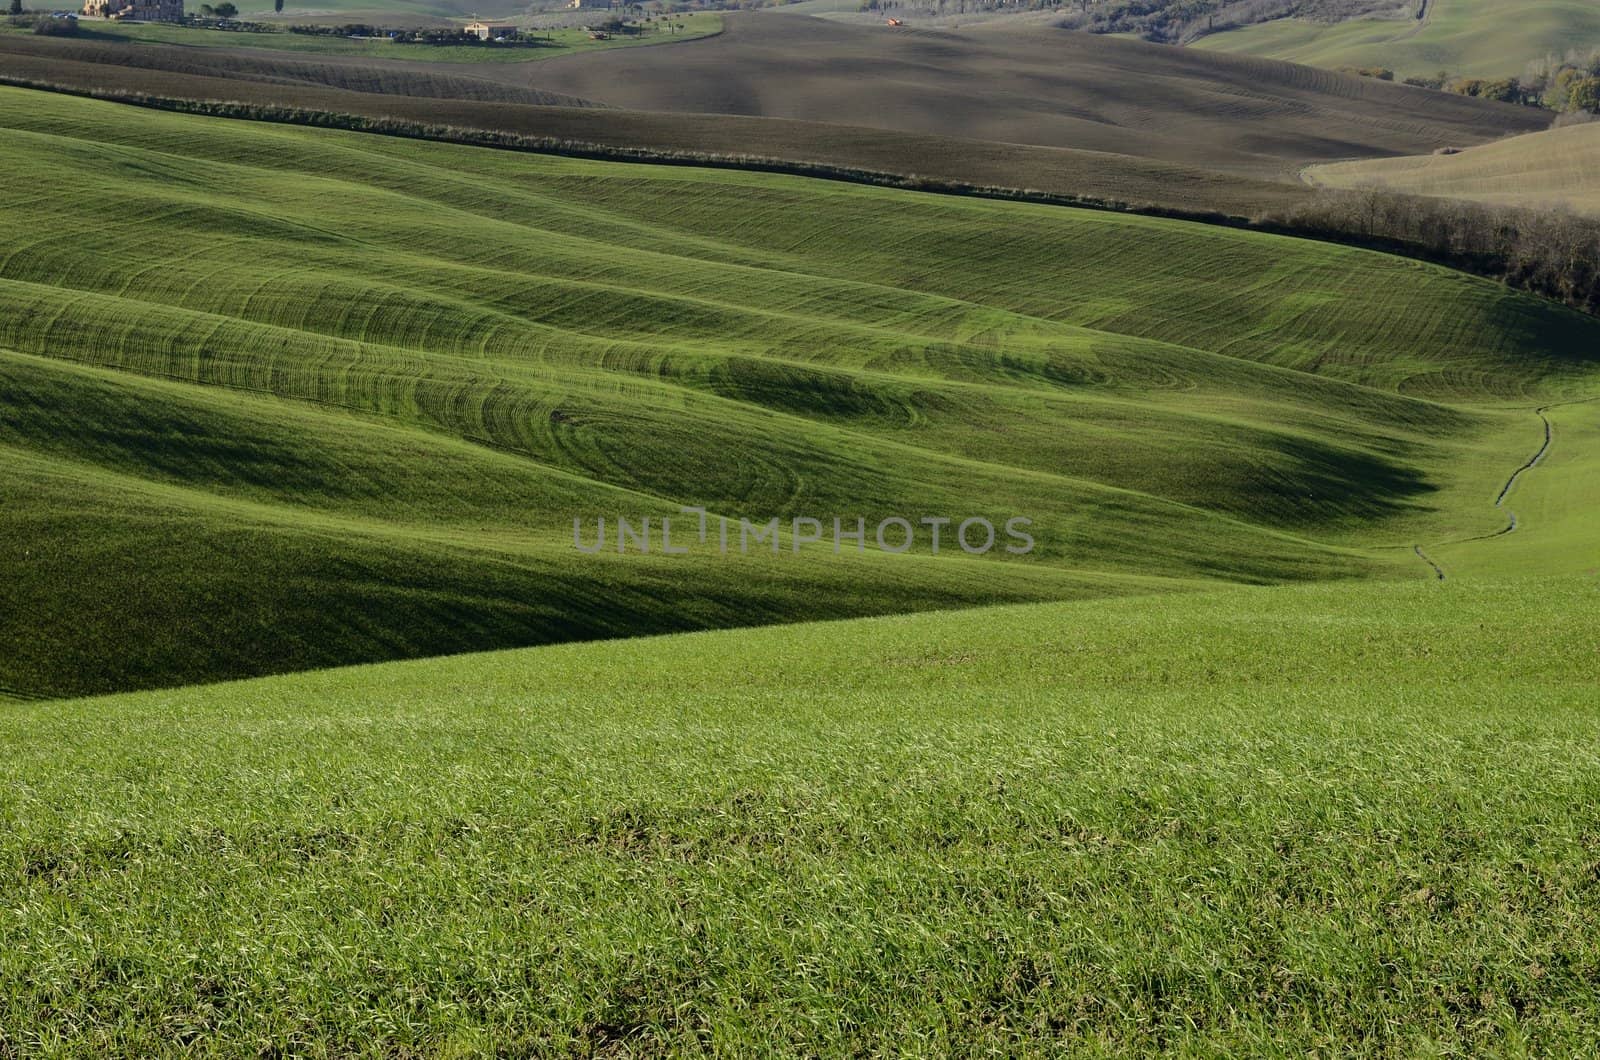 A typical green hillside landsdscape in Tuscany